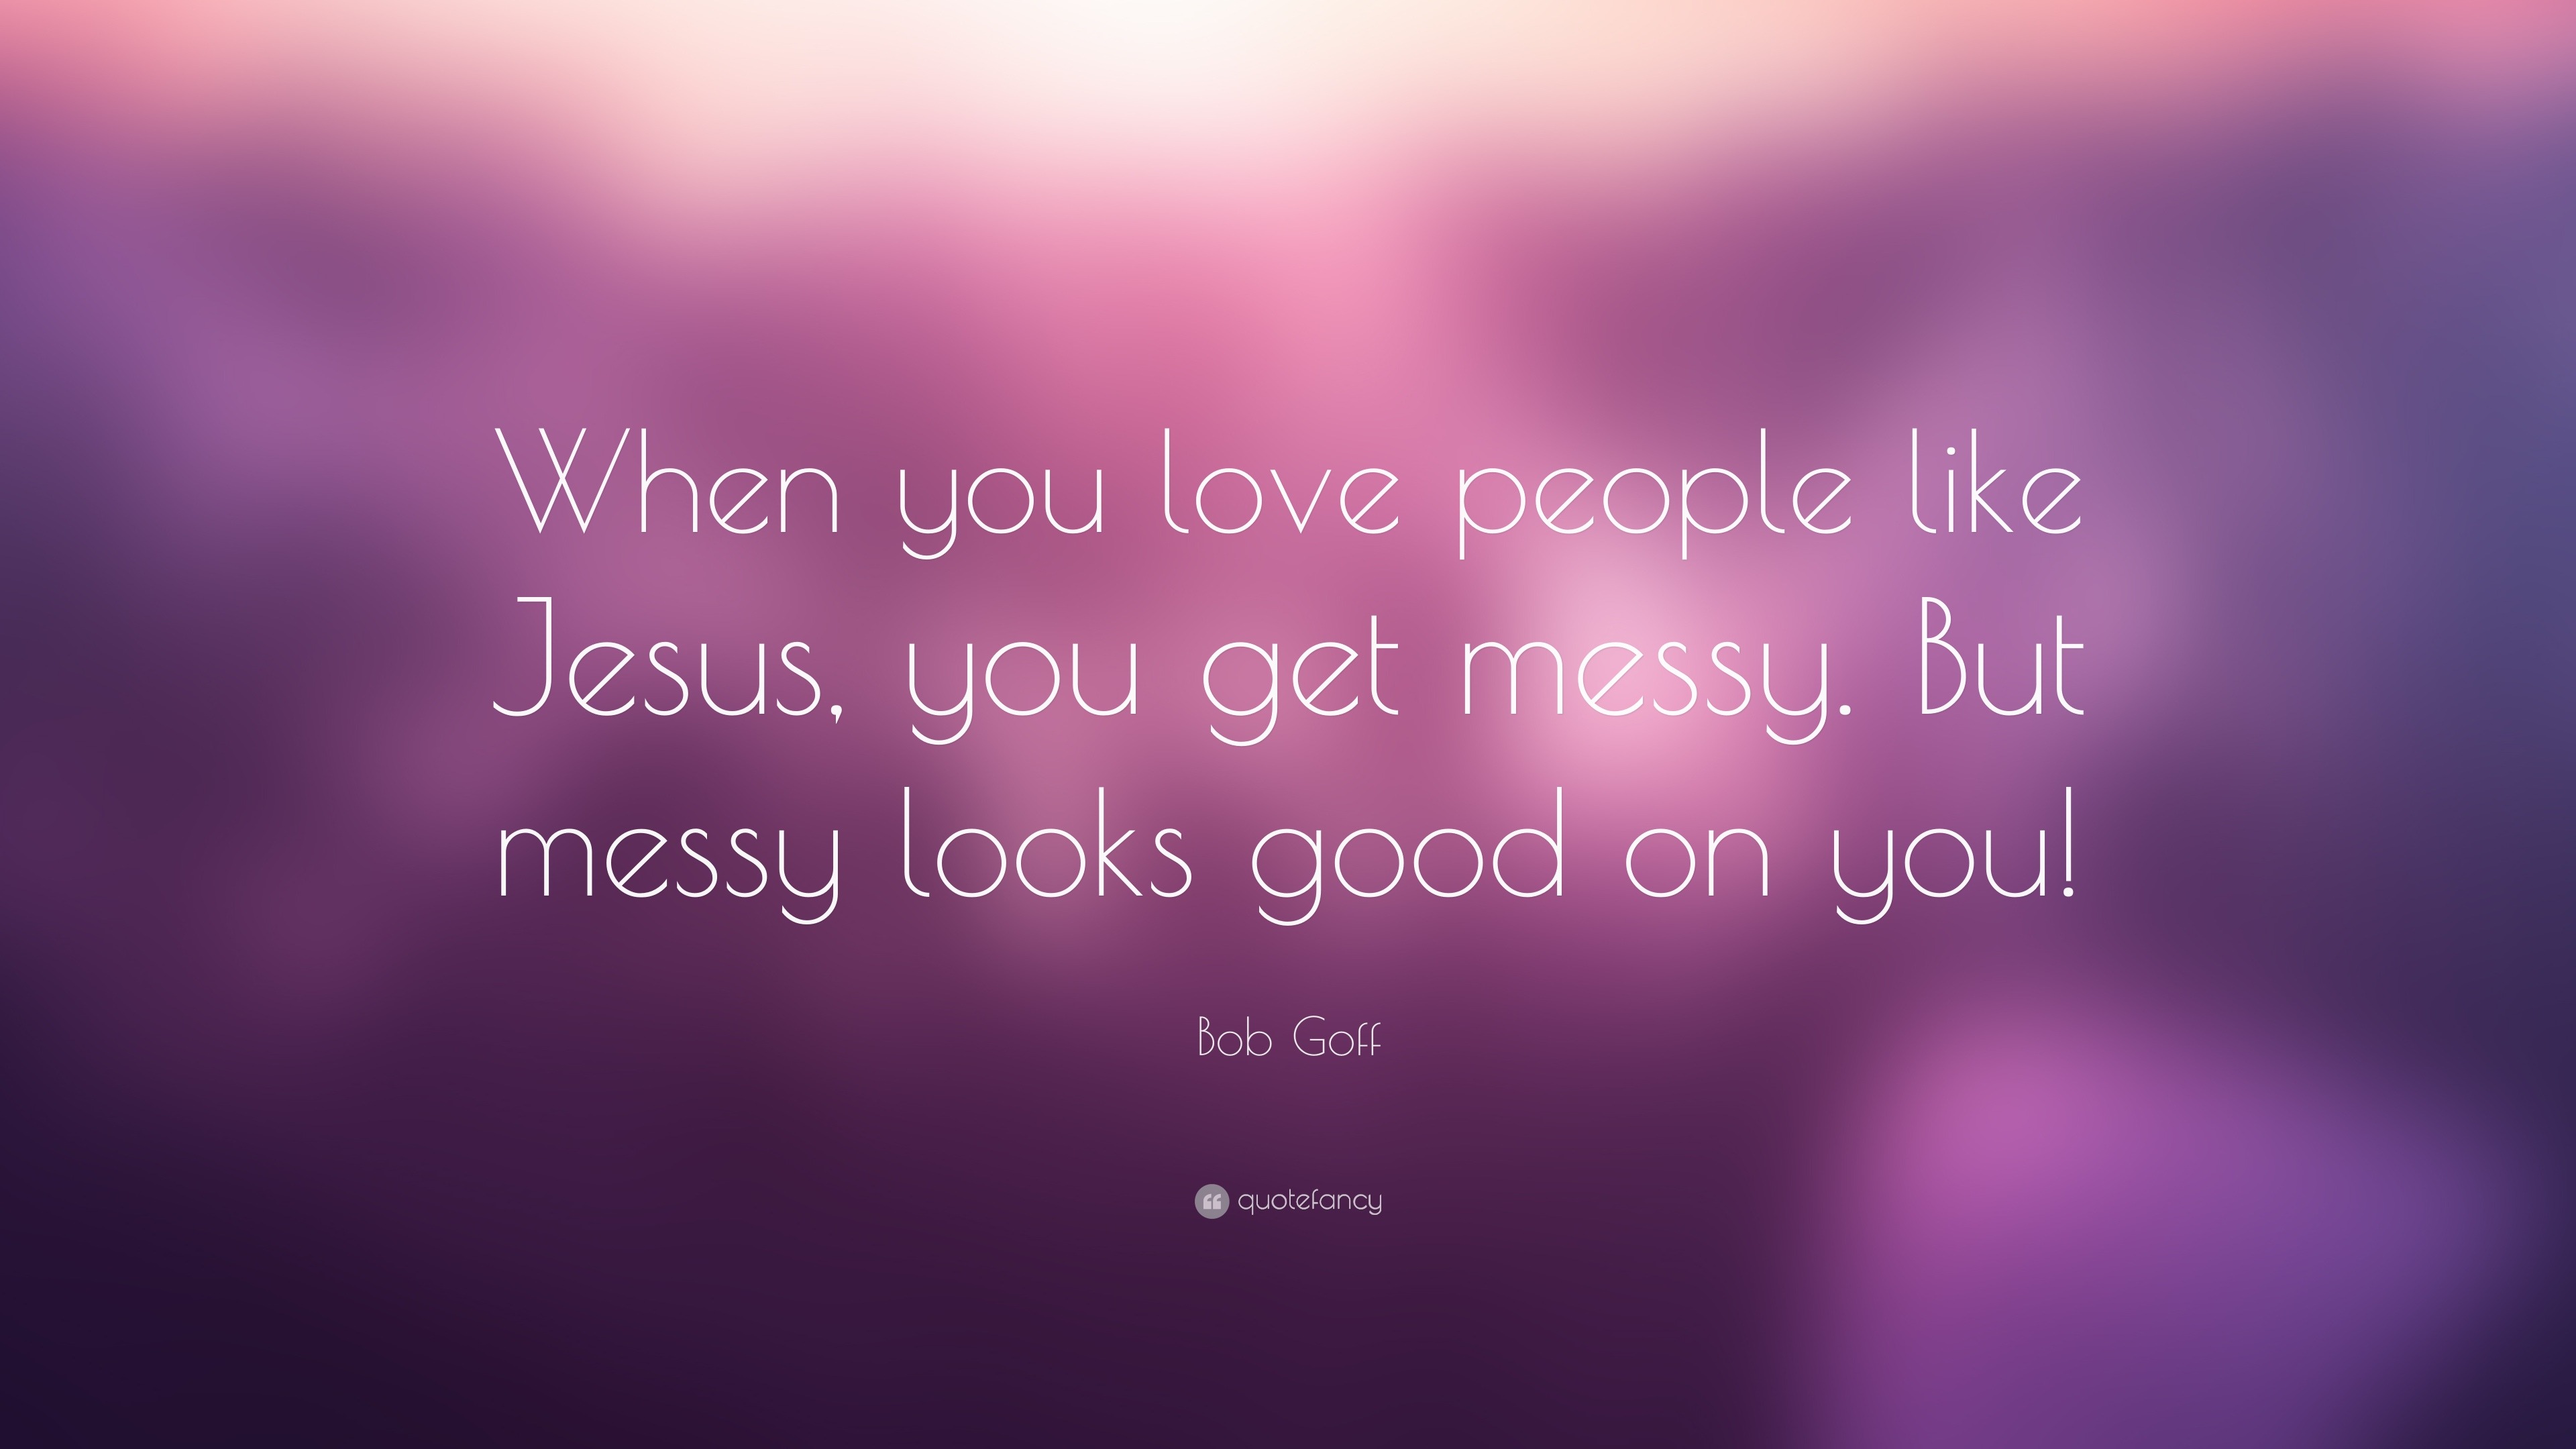 Bob Goff Quote “When you love people like Jesus you messy